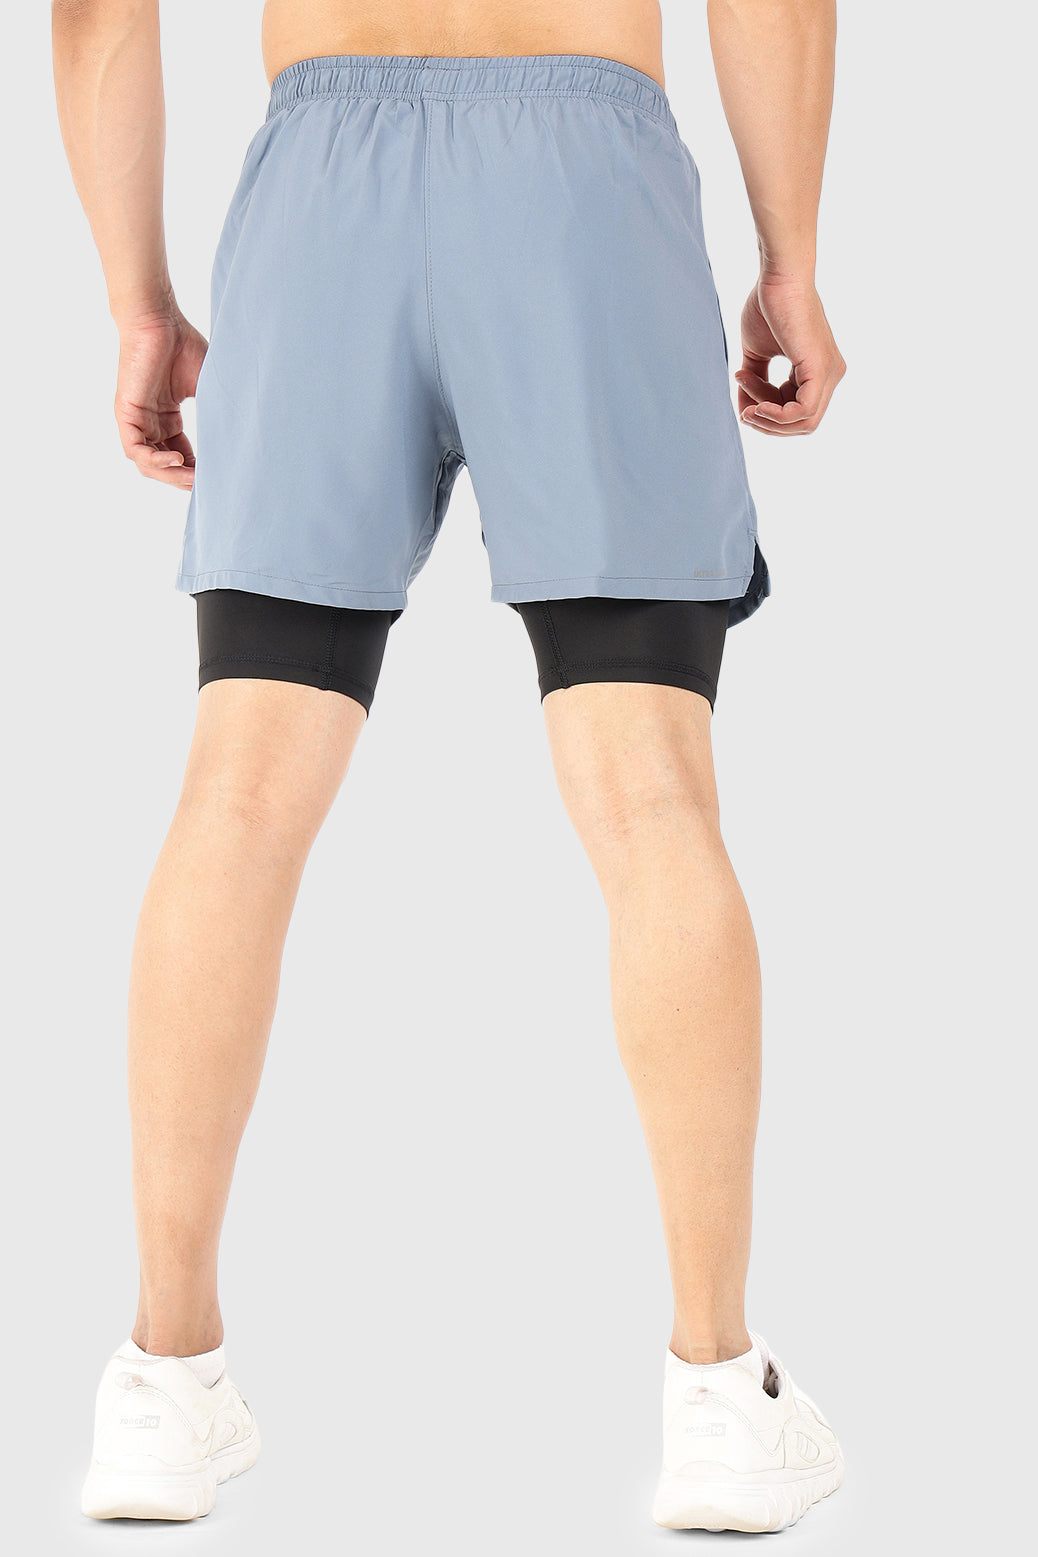 2 in 1 5" Compression Shorts Light Grey